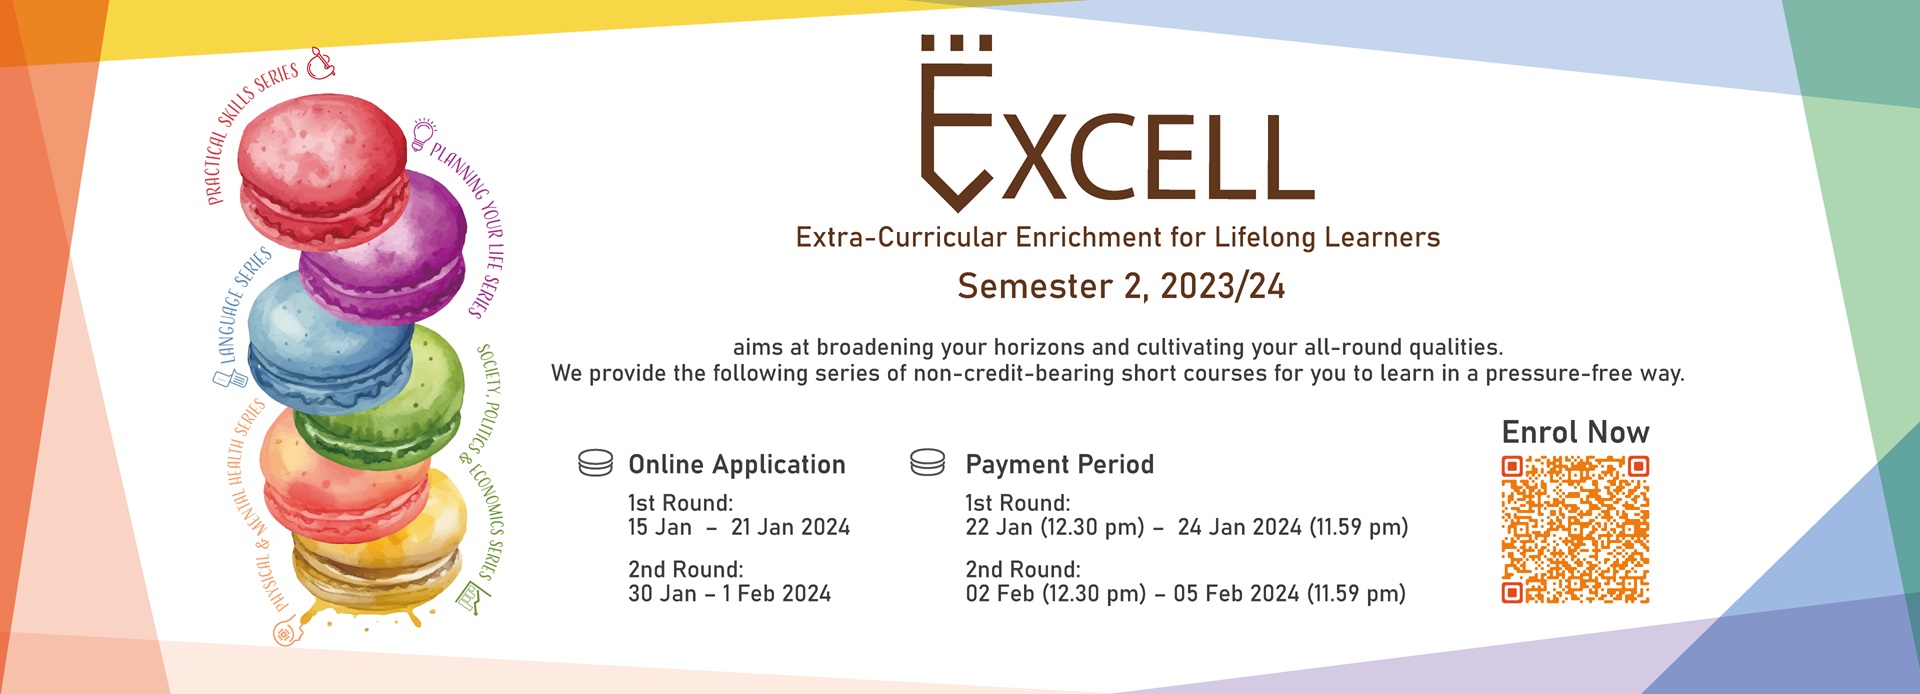  Extra-Curricular Enrichment for Lifelong Learners (EXCELL) Programme